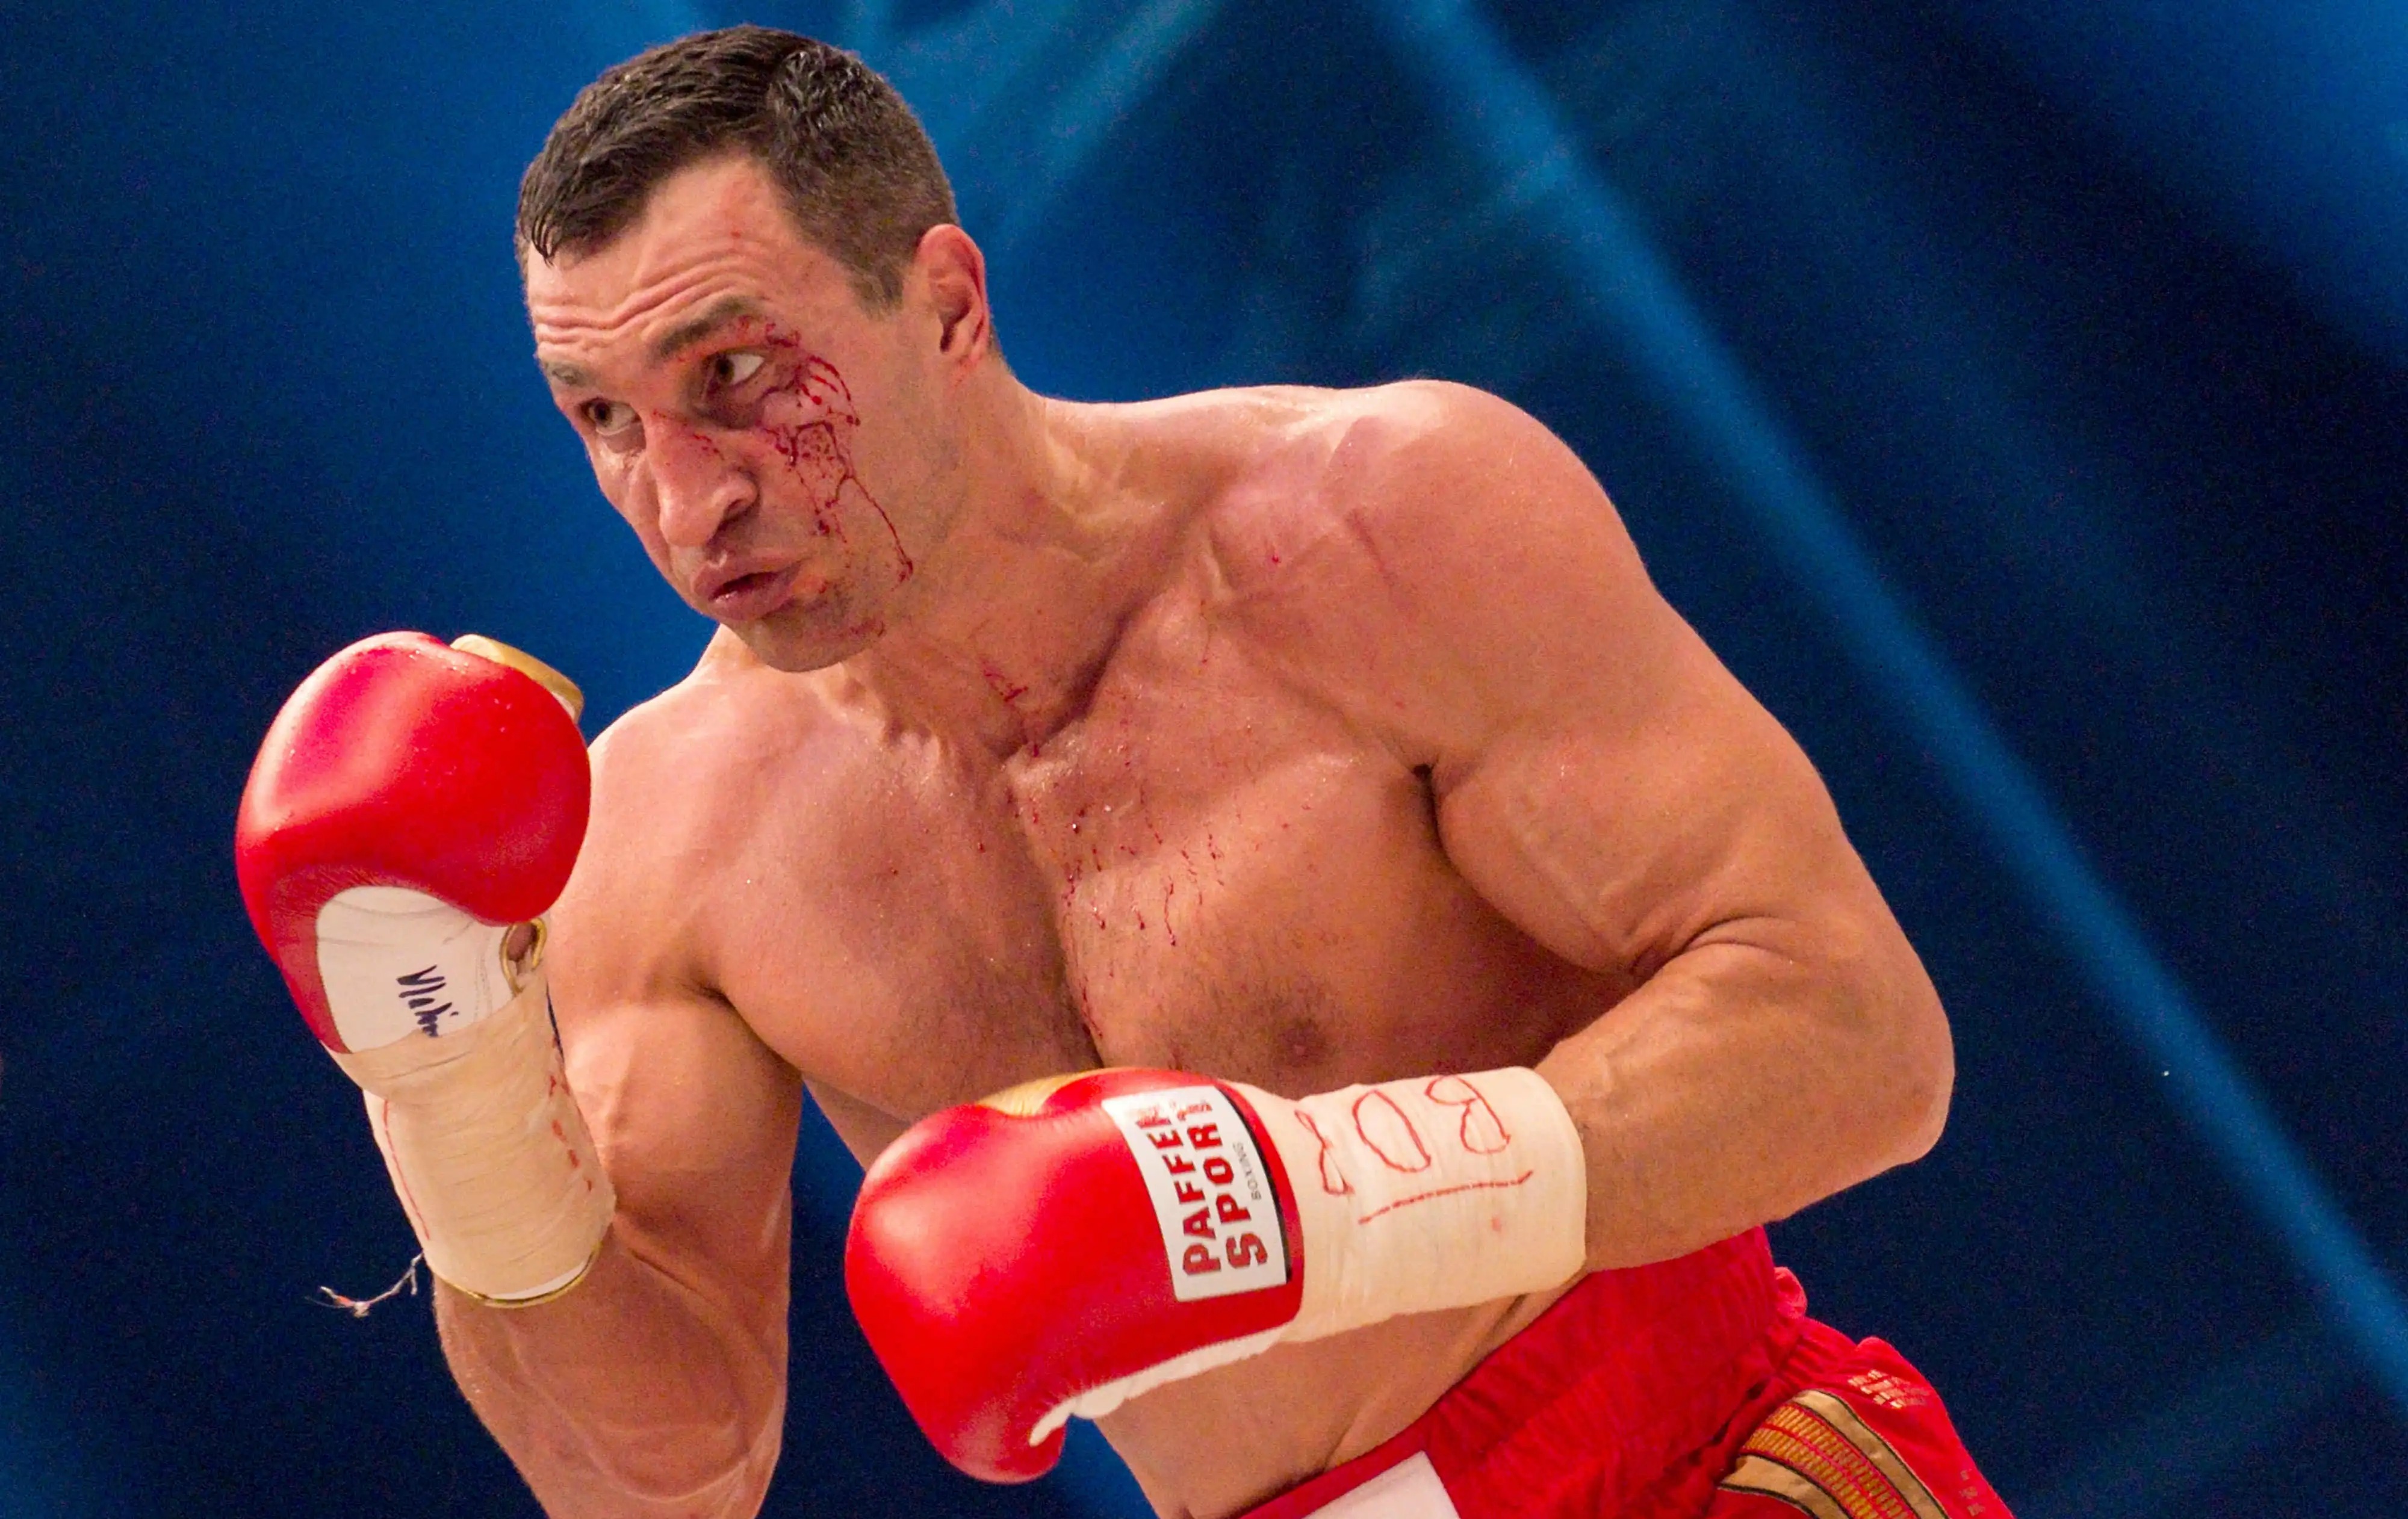 Klitschko could bolster his fortune with a bout against Tyson Fury in the future